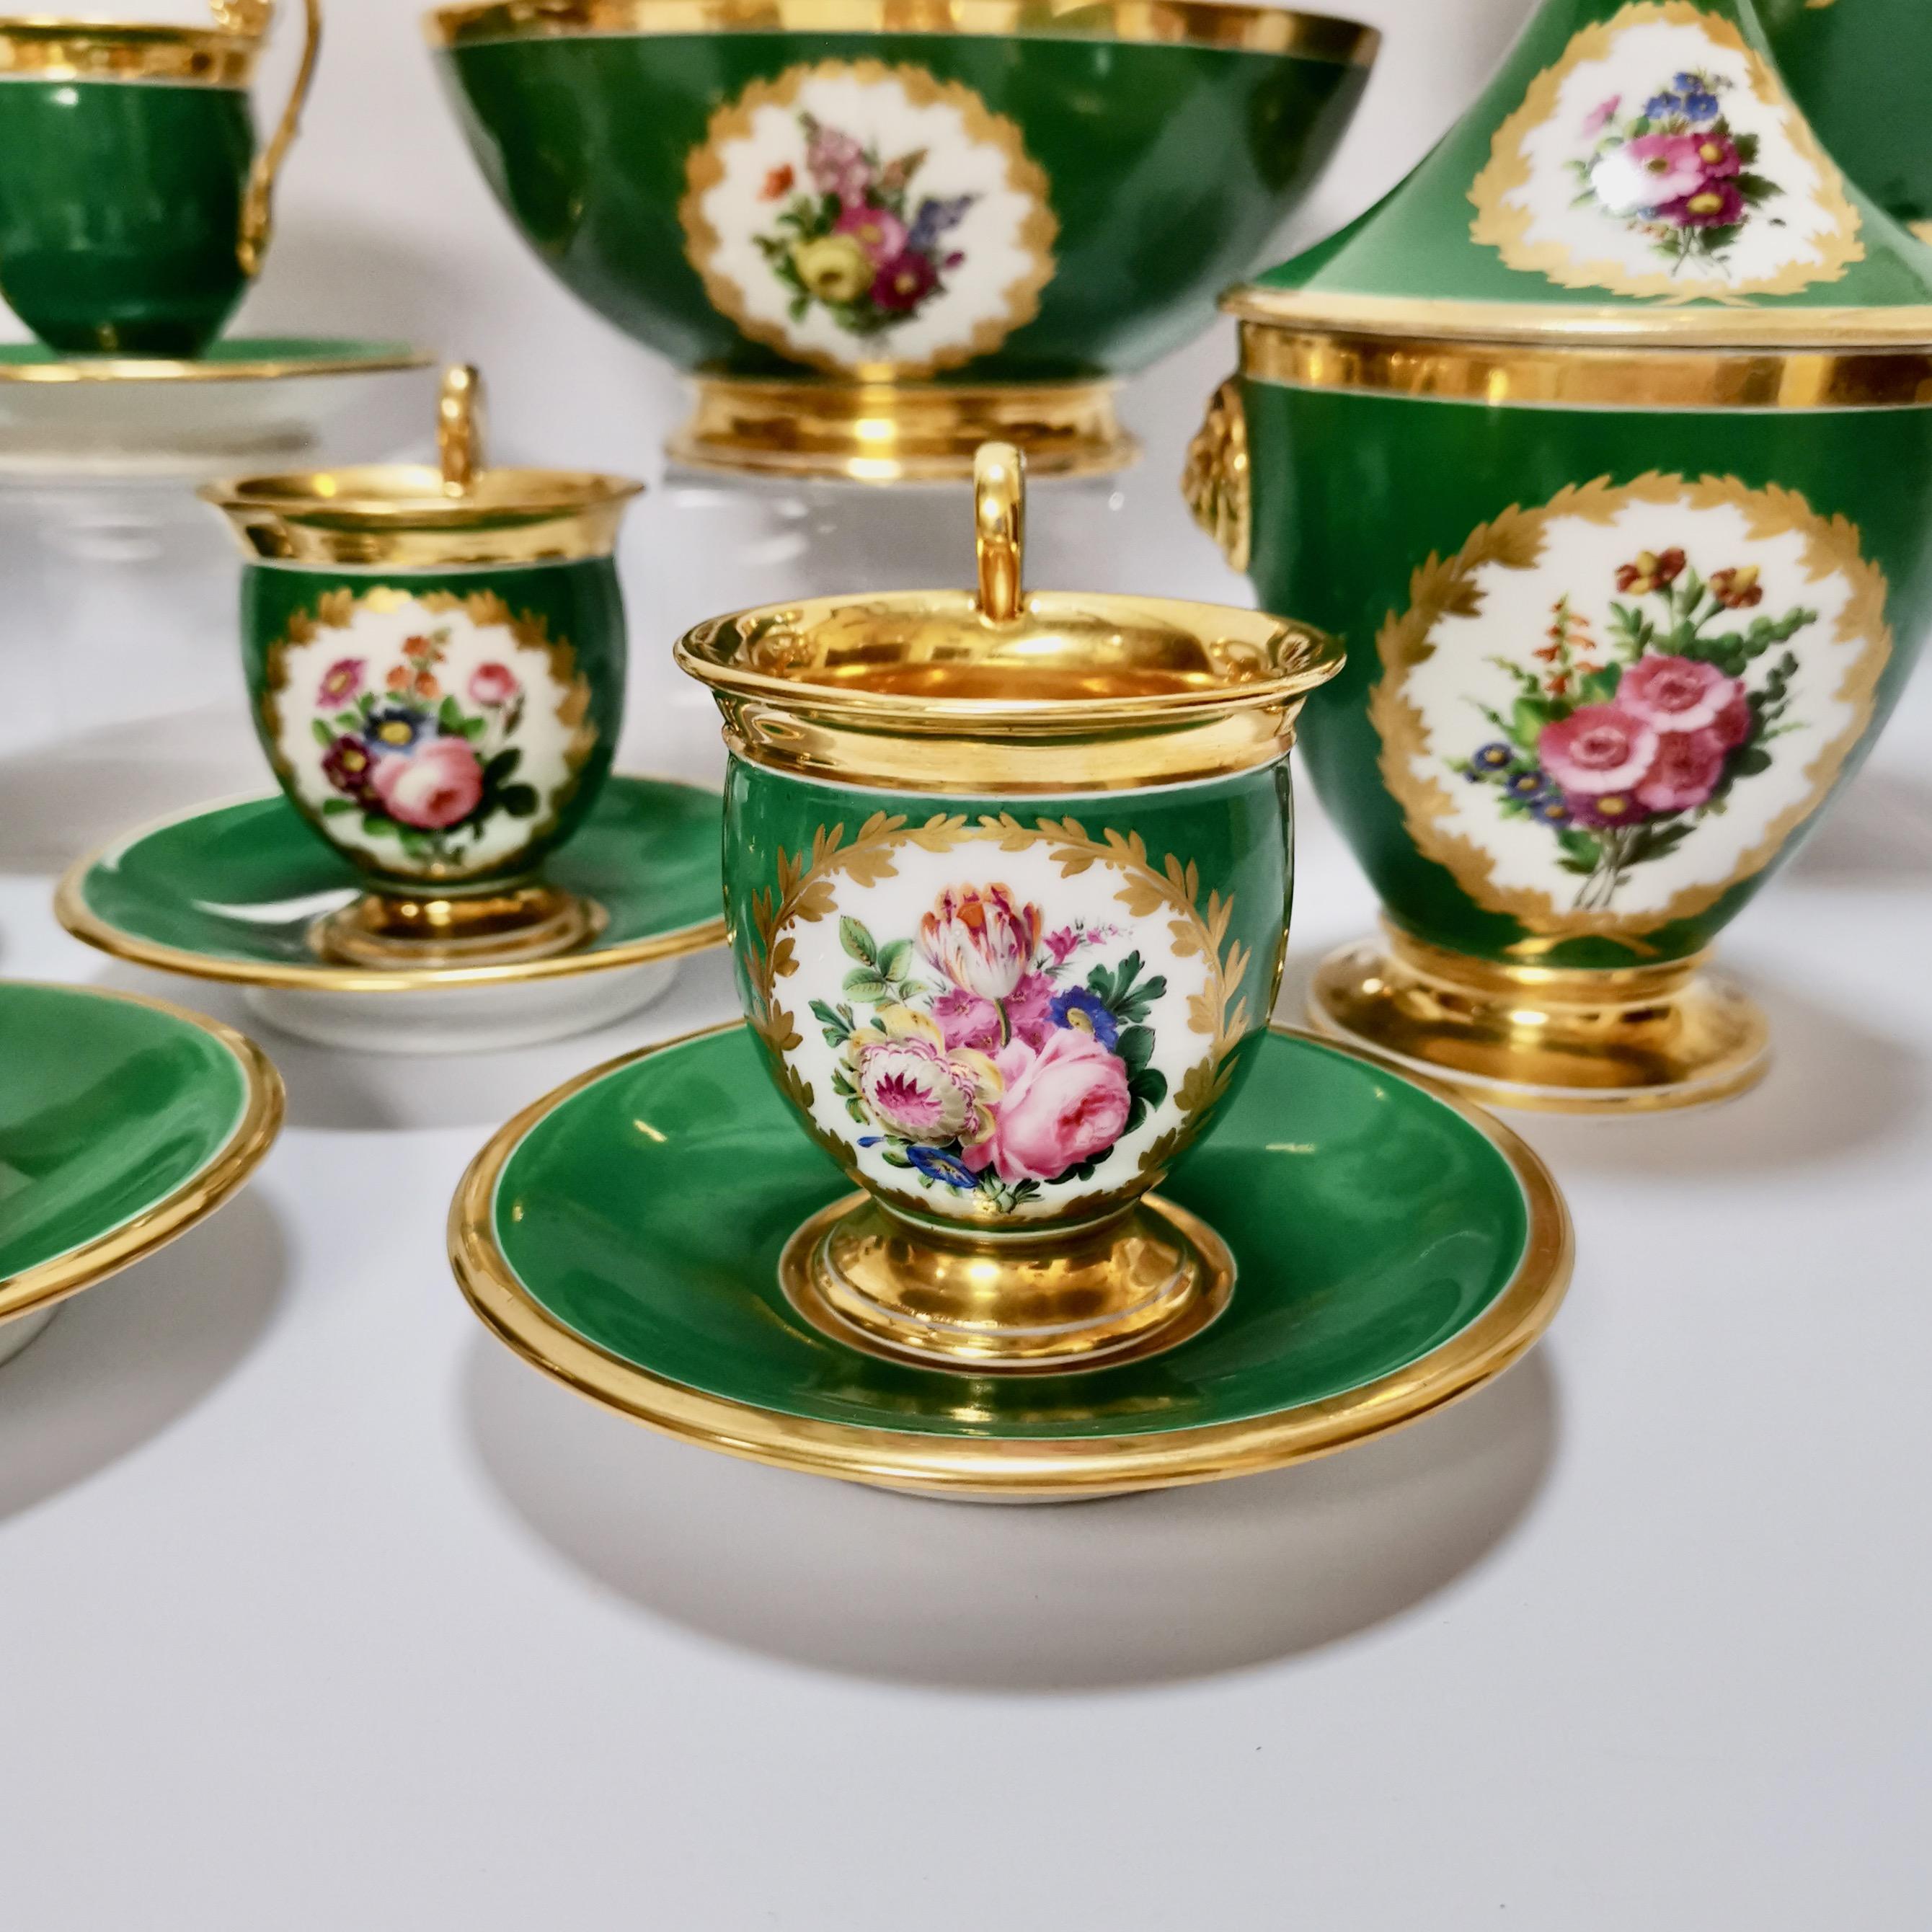 Early 19th Century Paris Porcelain Coffee Service, Emerald Green and Floral, Empire Style ca 1820